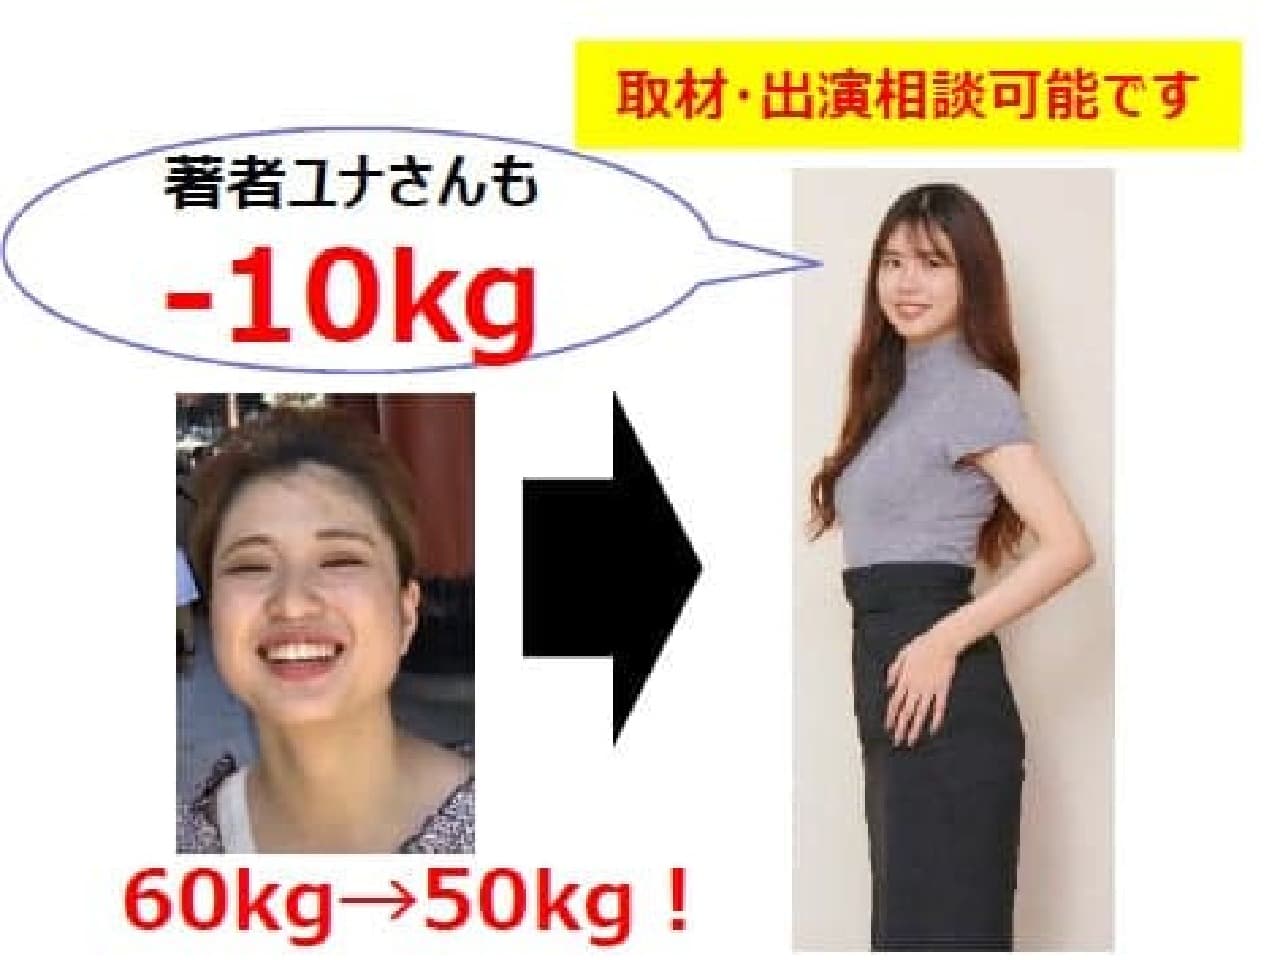 Yuna's Healthy Recipes to Lose 10Kg and Look Red! Yuna's Healthy Recipes" will be released on May 20】The first recipe book by Yuna, a popular cook on SNS, which introduces 128 simple healthy recipes that can be made in less than 10 minutes. Image 2